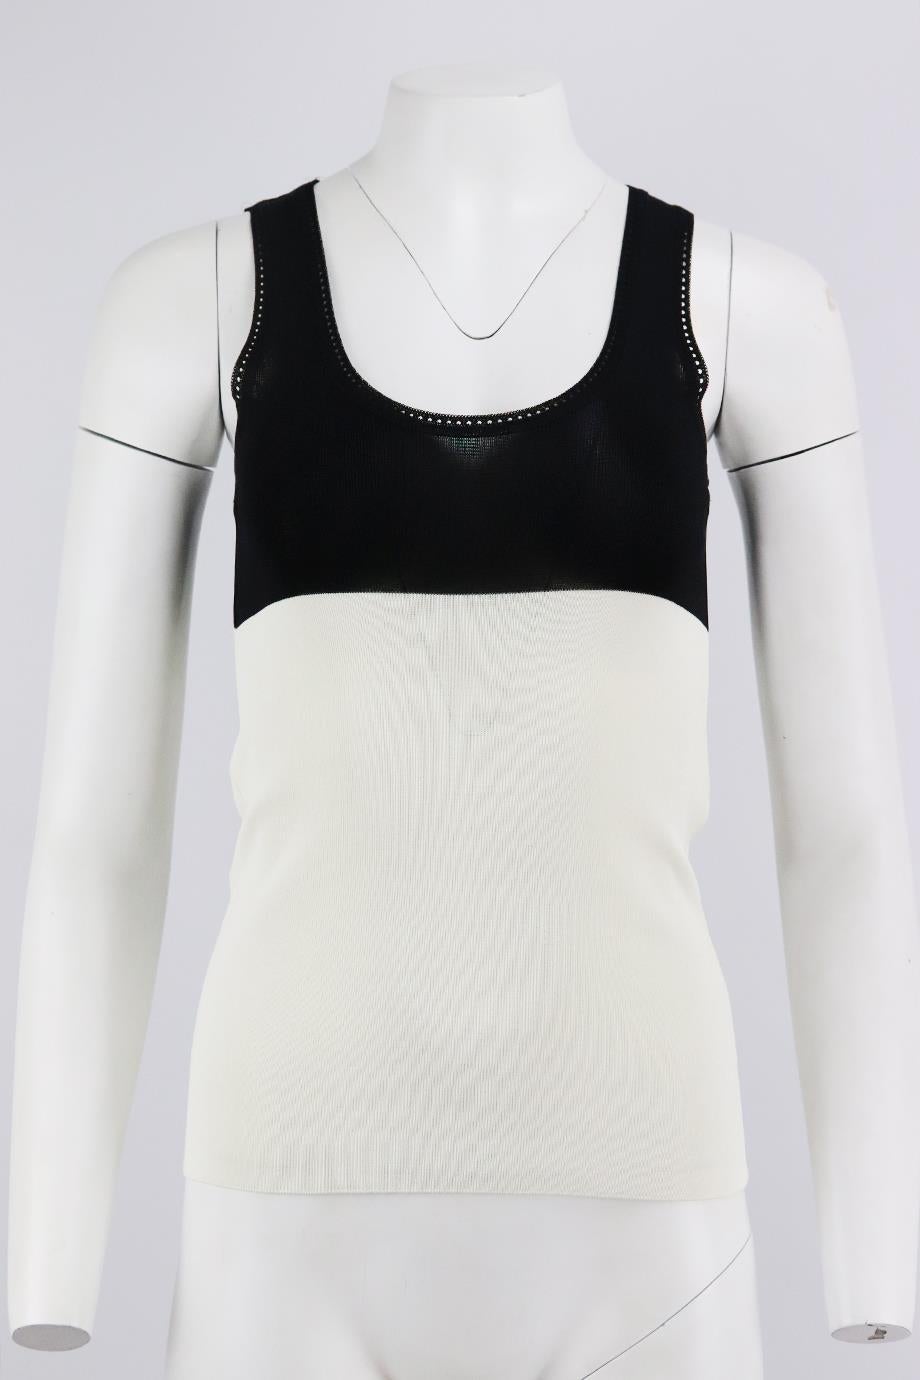 Balenciaga two tone stretch knit top. Black and white. Sleeveless, crewneck. 100% Rayon. Size: FR 34 (UK 6, US 2, IT 38). Bust: 25 in. Waist: 24 in. Hips: 27 in. Length: 21 in. Very good condition - No sign of wear; see pictures.
